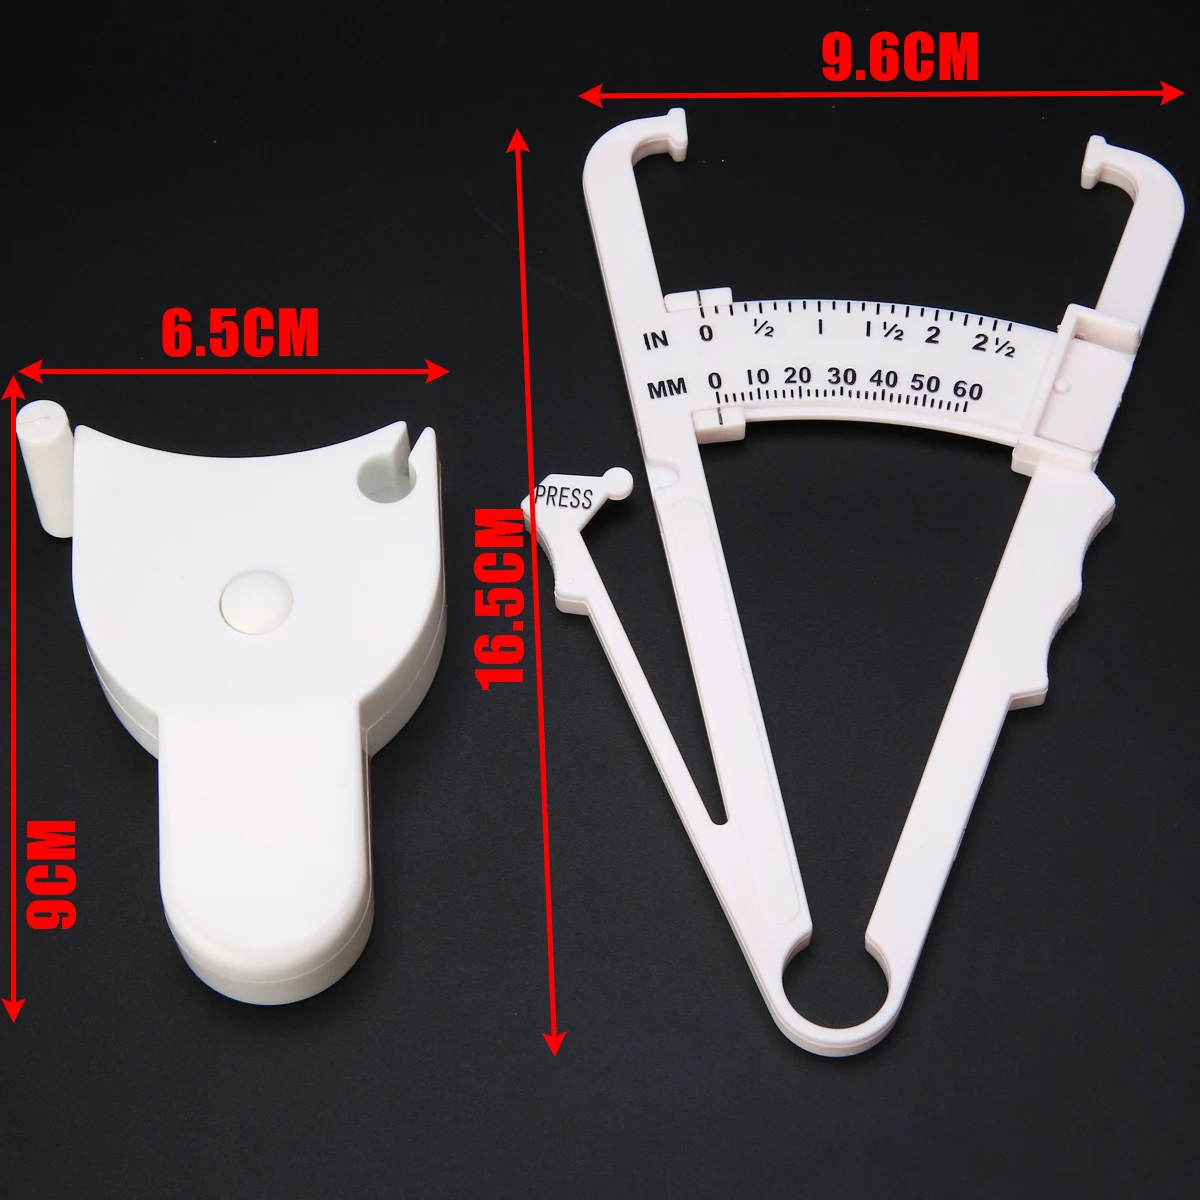 2Pcs Body Fat Caliper Mass Measuring Tape Tester Fitness Lose Weight For Fitness Body Building Equipment Tools